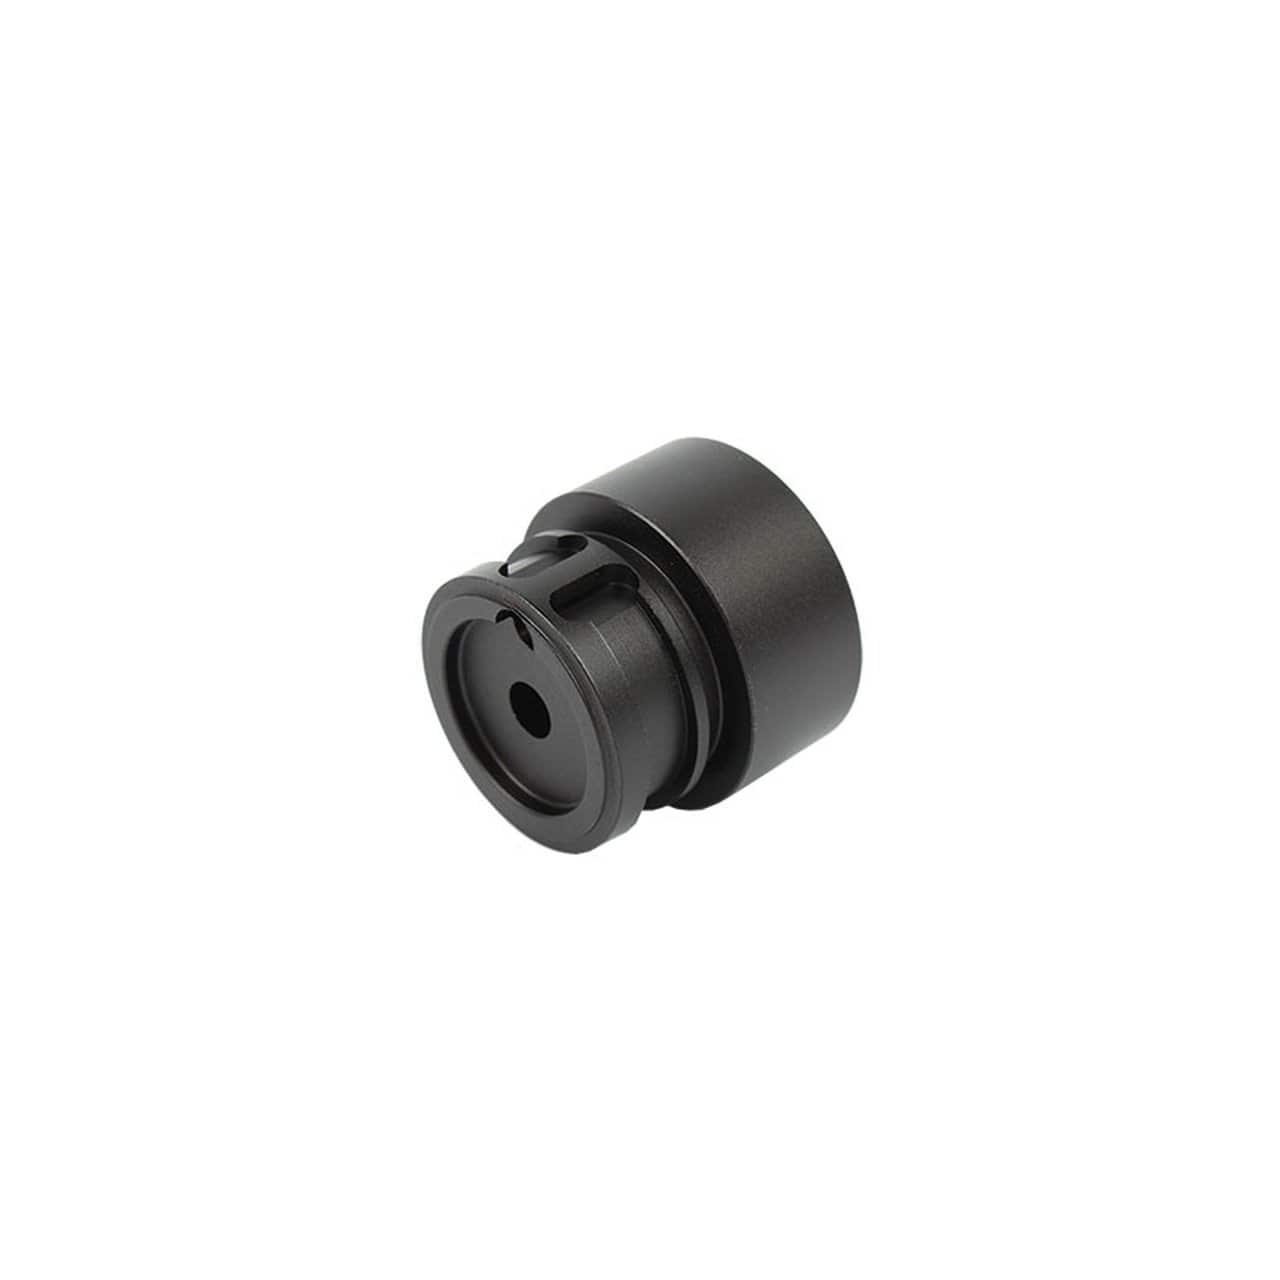 UBR Stock Adapter 98 - Eminent Paintball And Airsoft